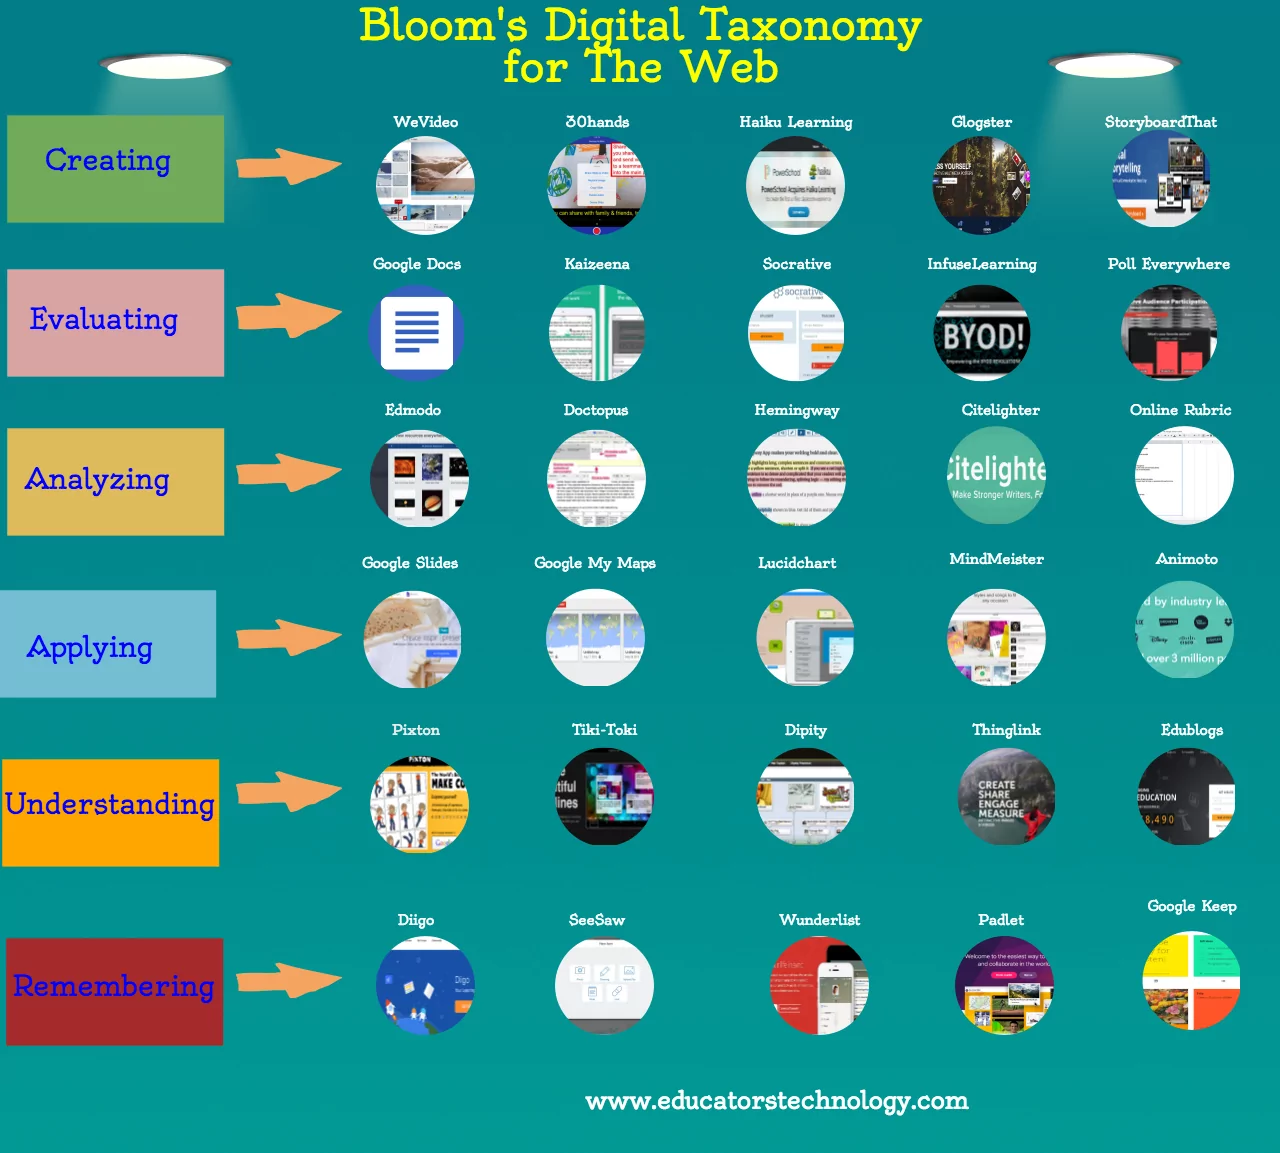 The Web Version of Bloom